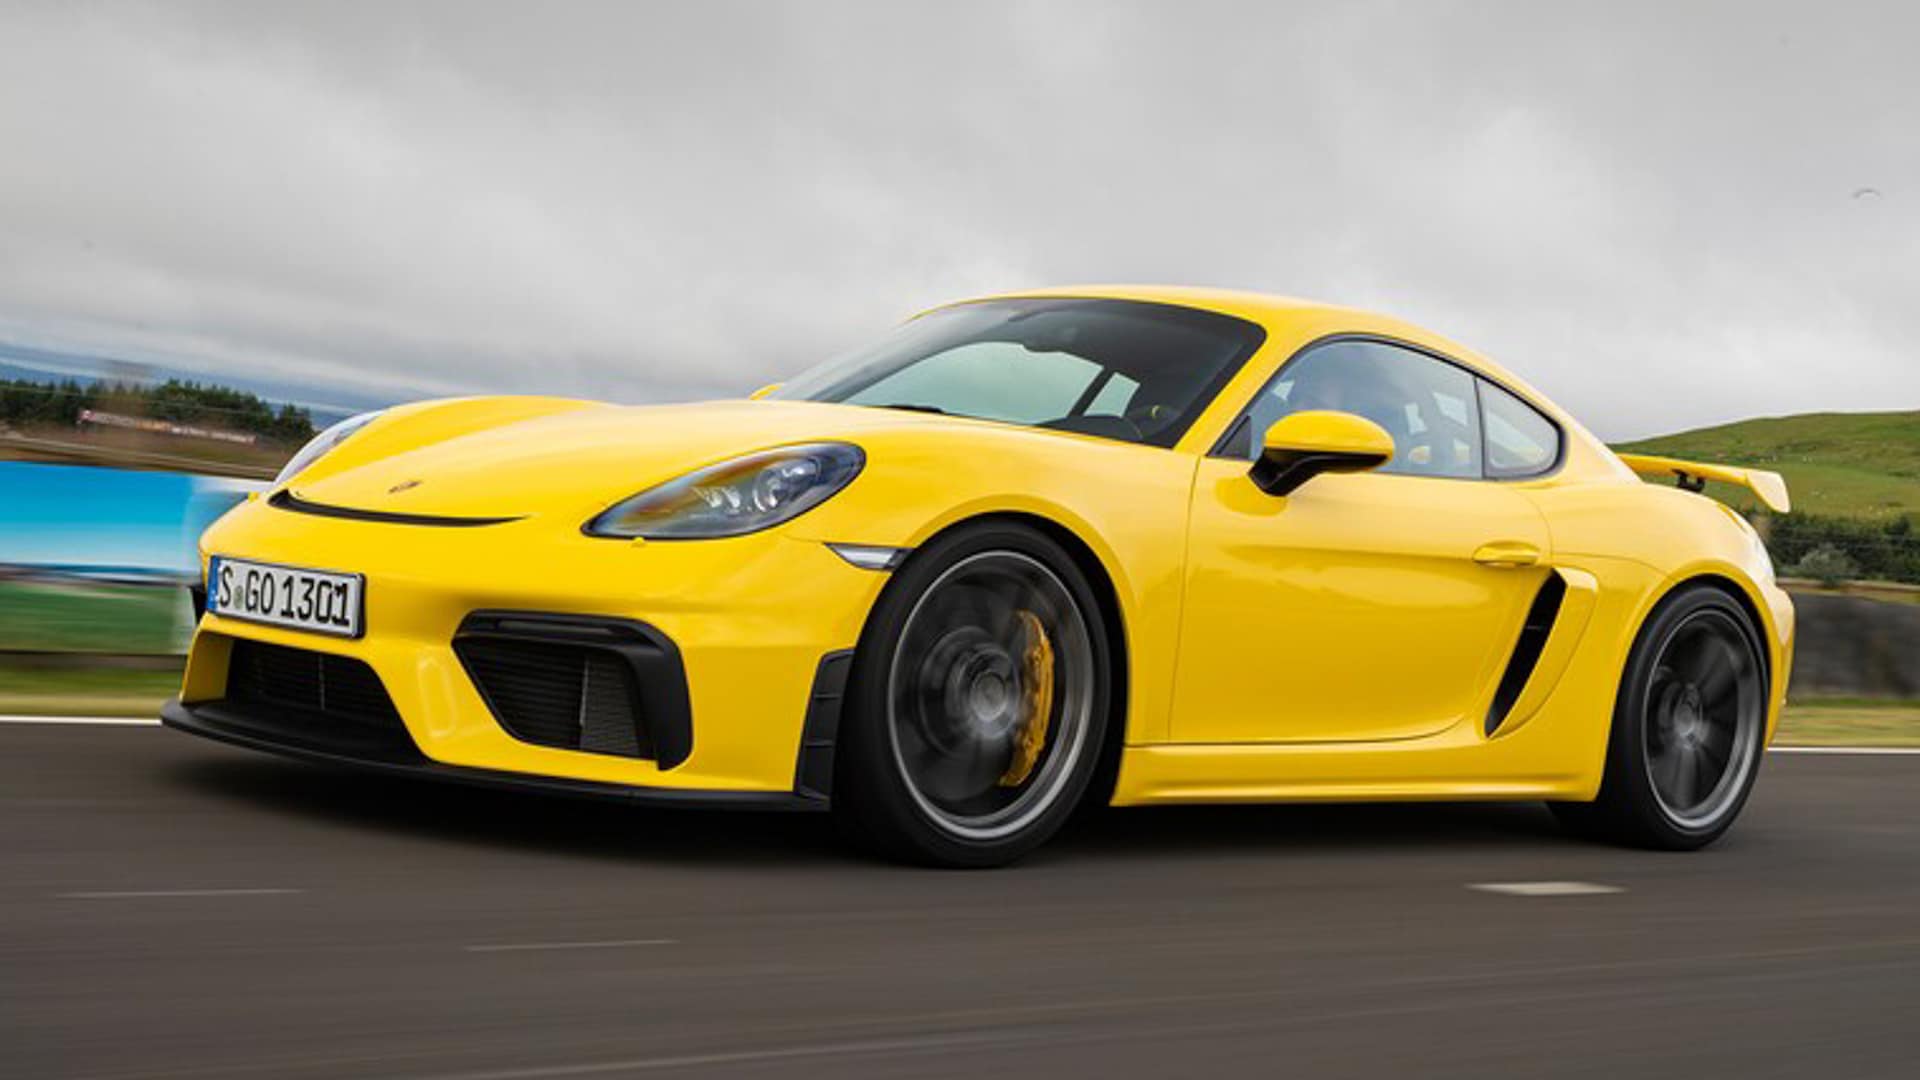 2021 Porsche 718 Cayman Prices, Reviews, and Photos - MotorTrend